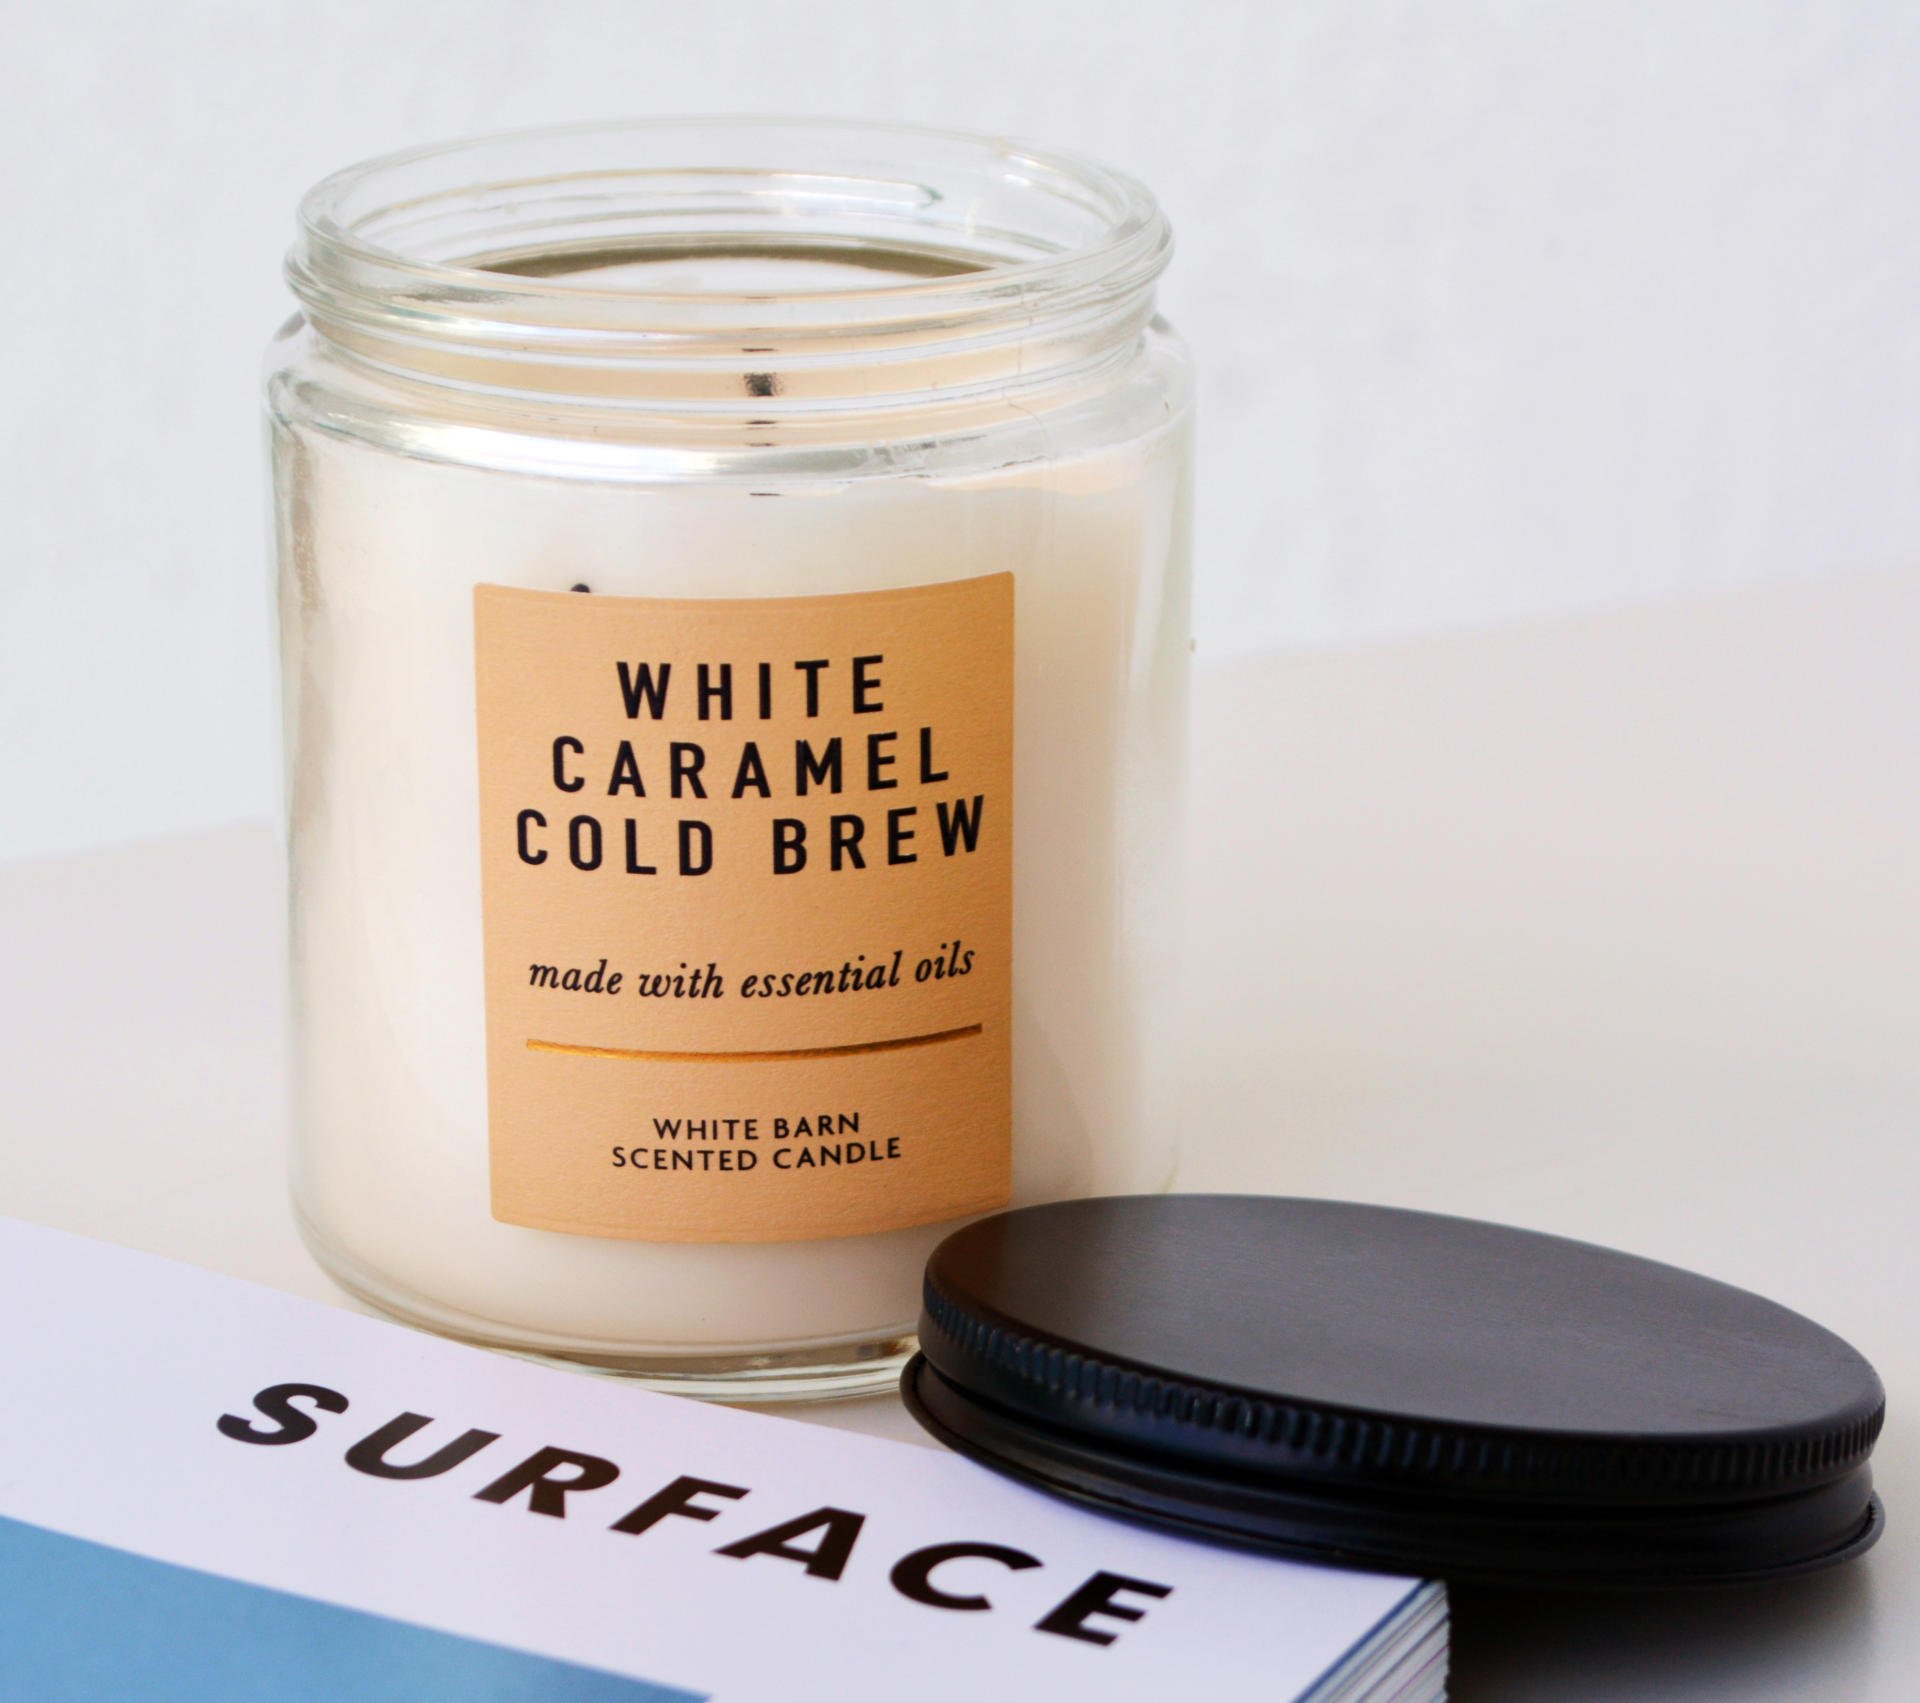 Bath and Body Works White Caramel Cold Brew Candle